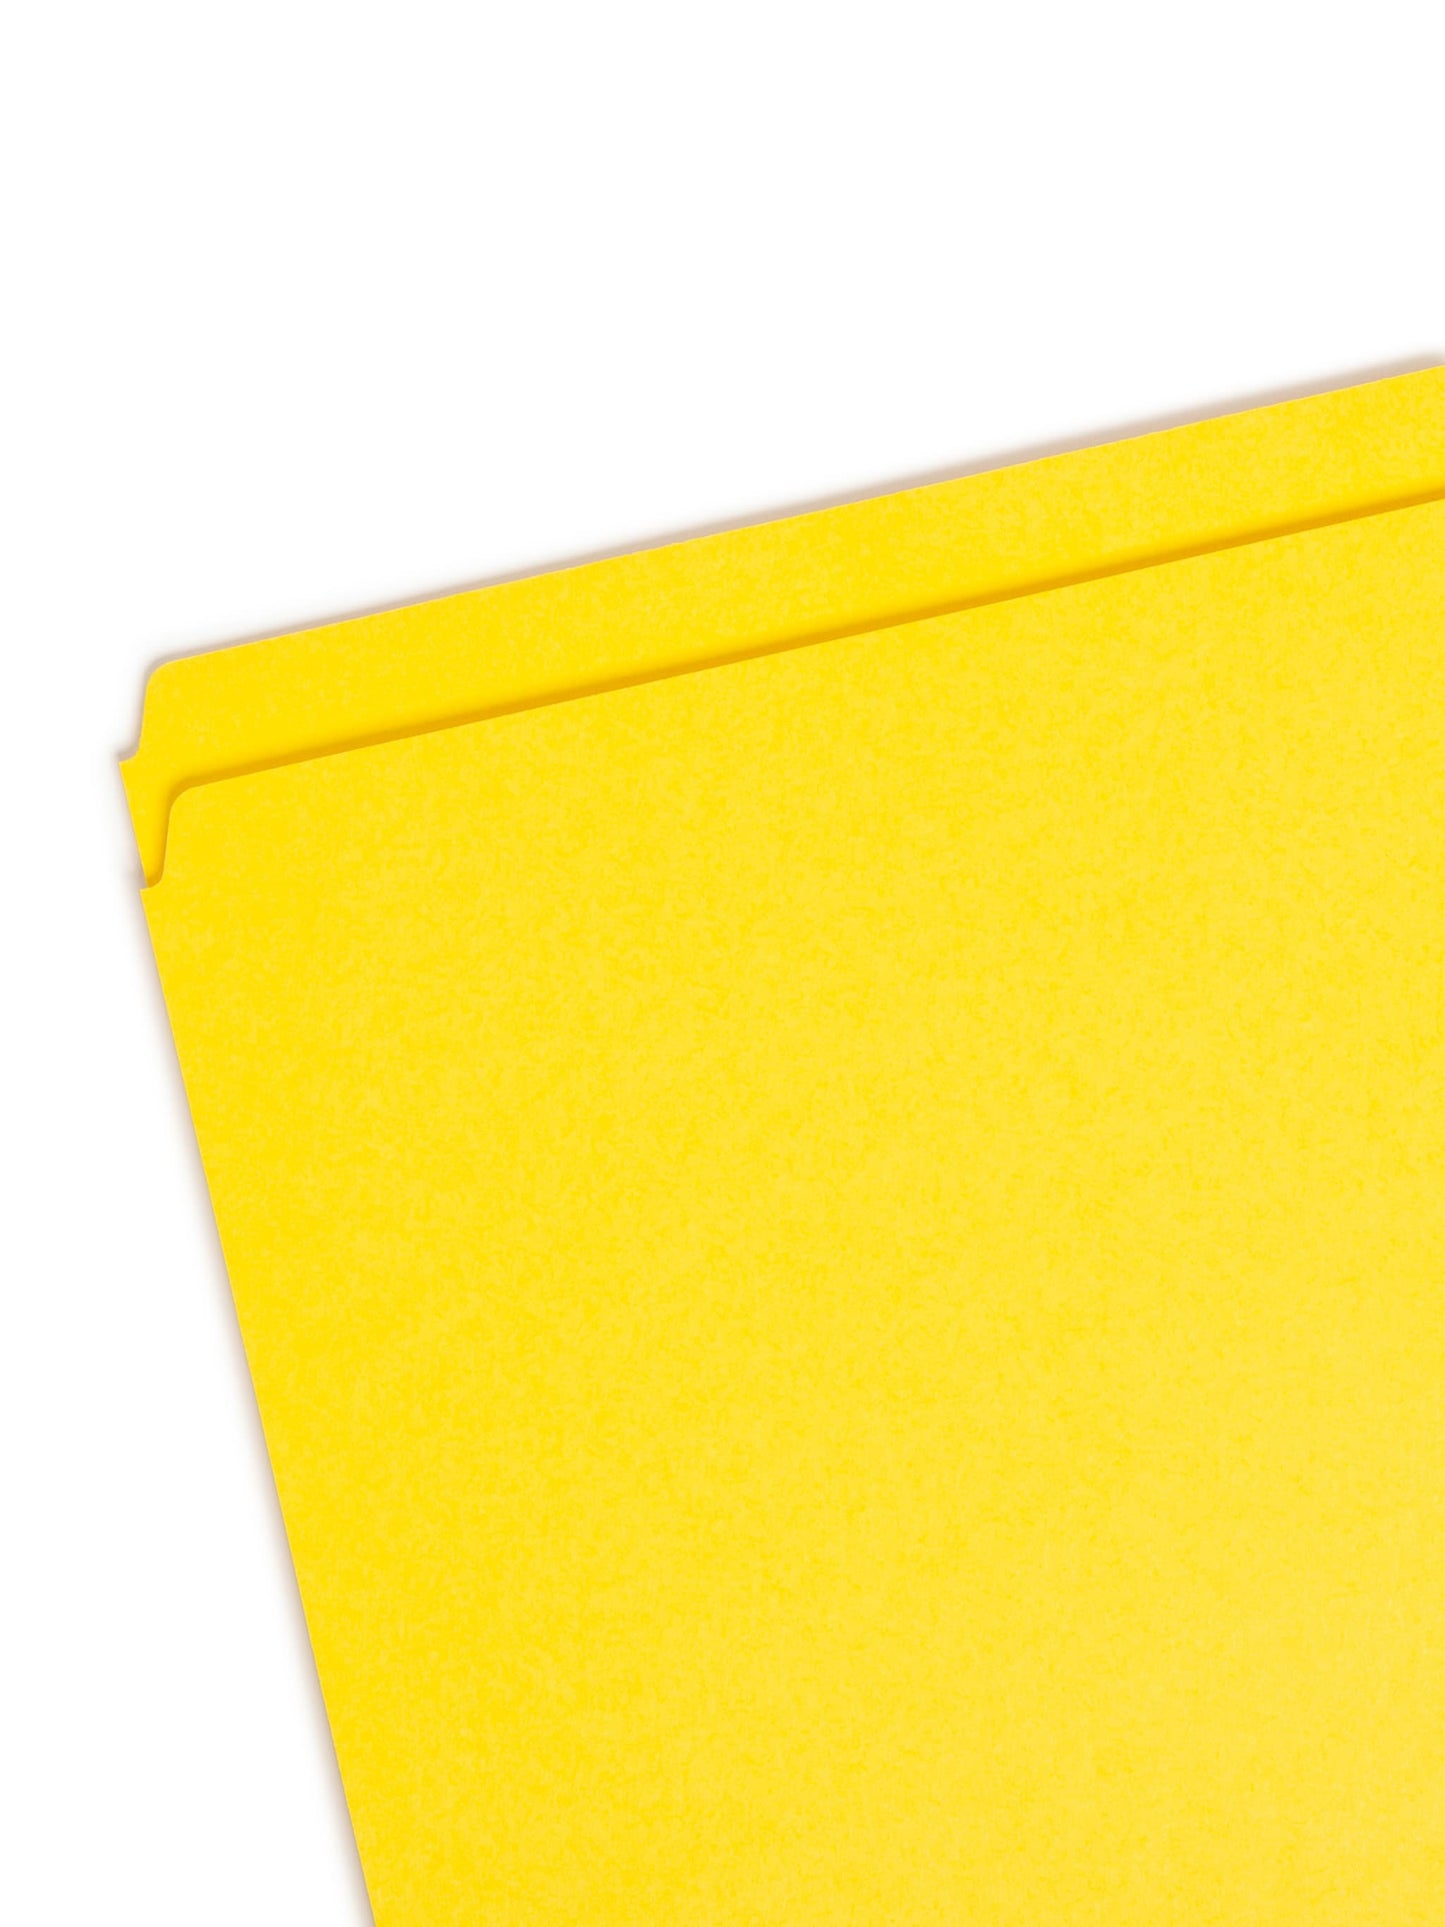 Standard File Folders, Straight-Cut Tab, Yellow Color, Letter Size, Set of 100, 086486109468